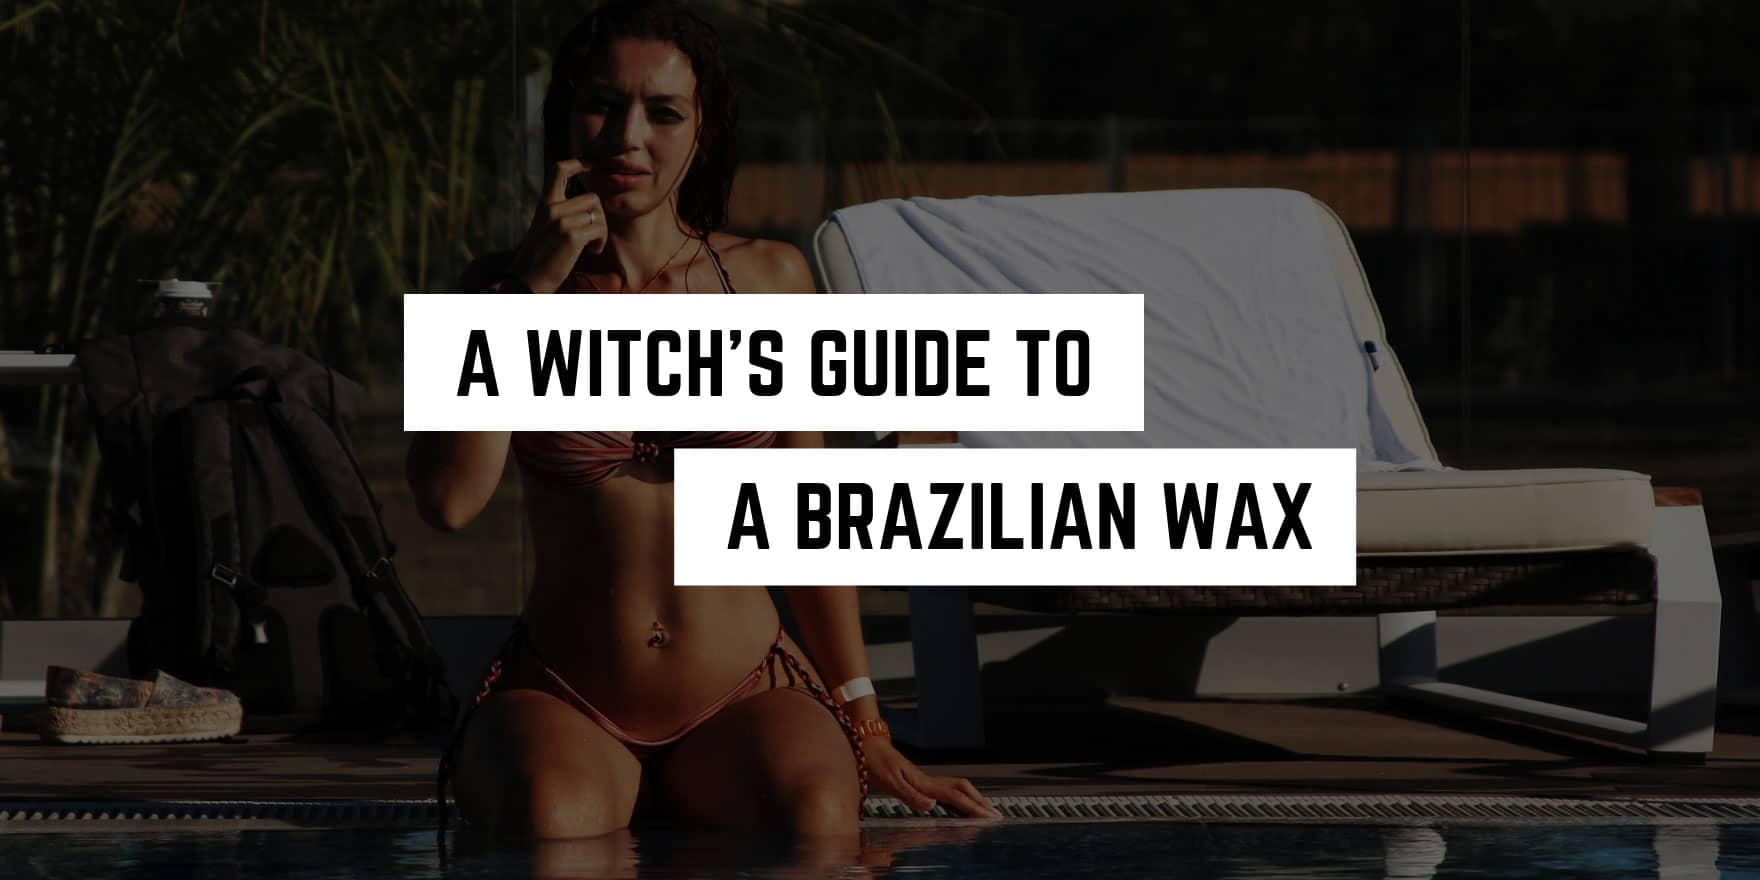 A Witch’s Guide to a Brazilian Wax